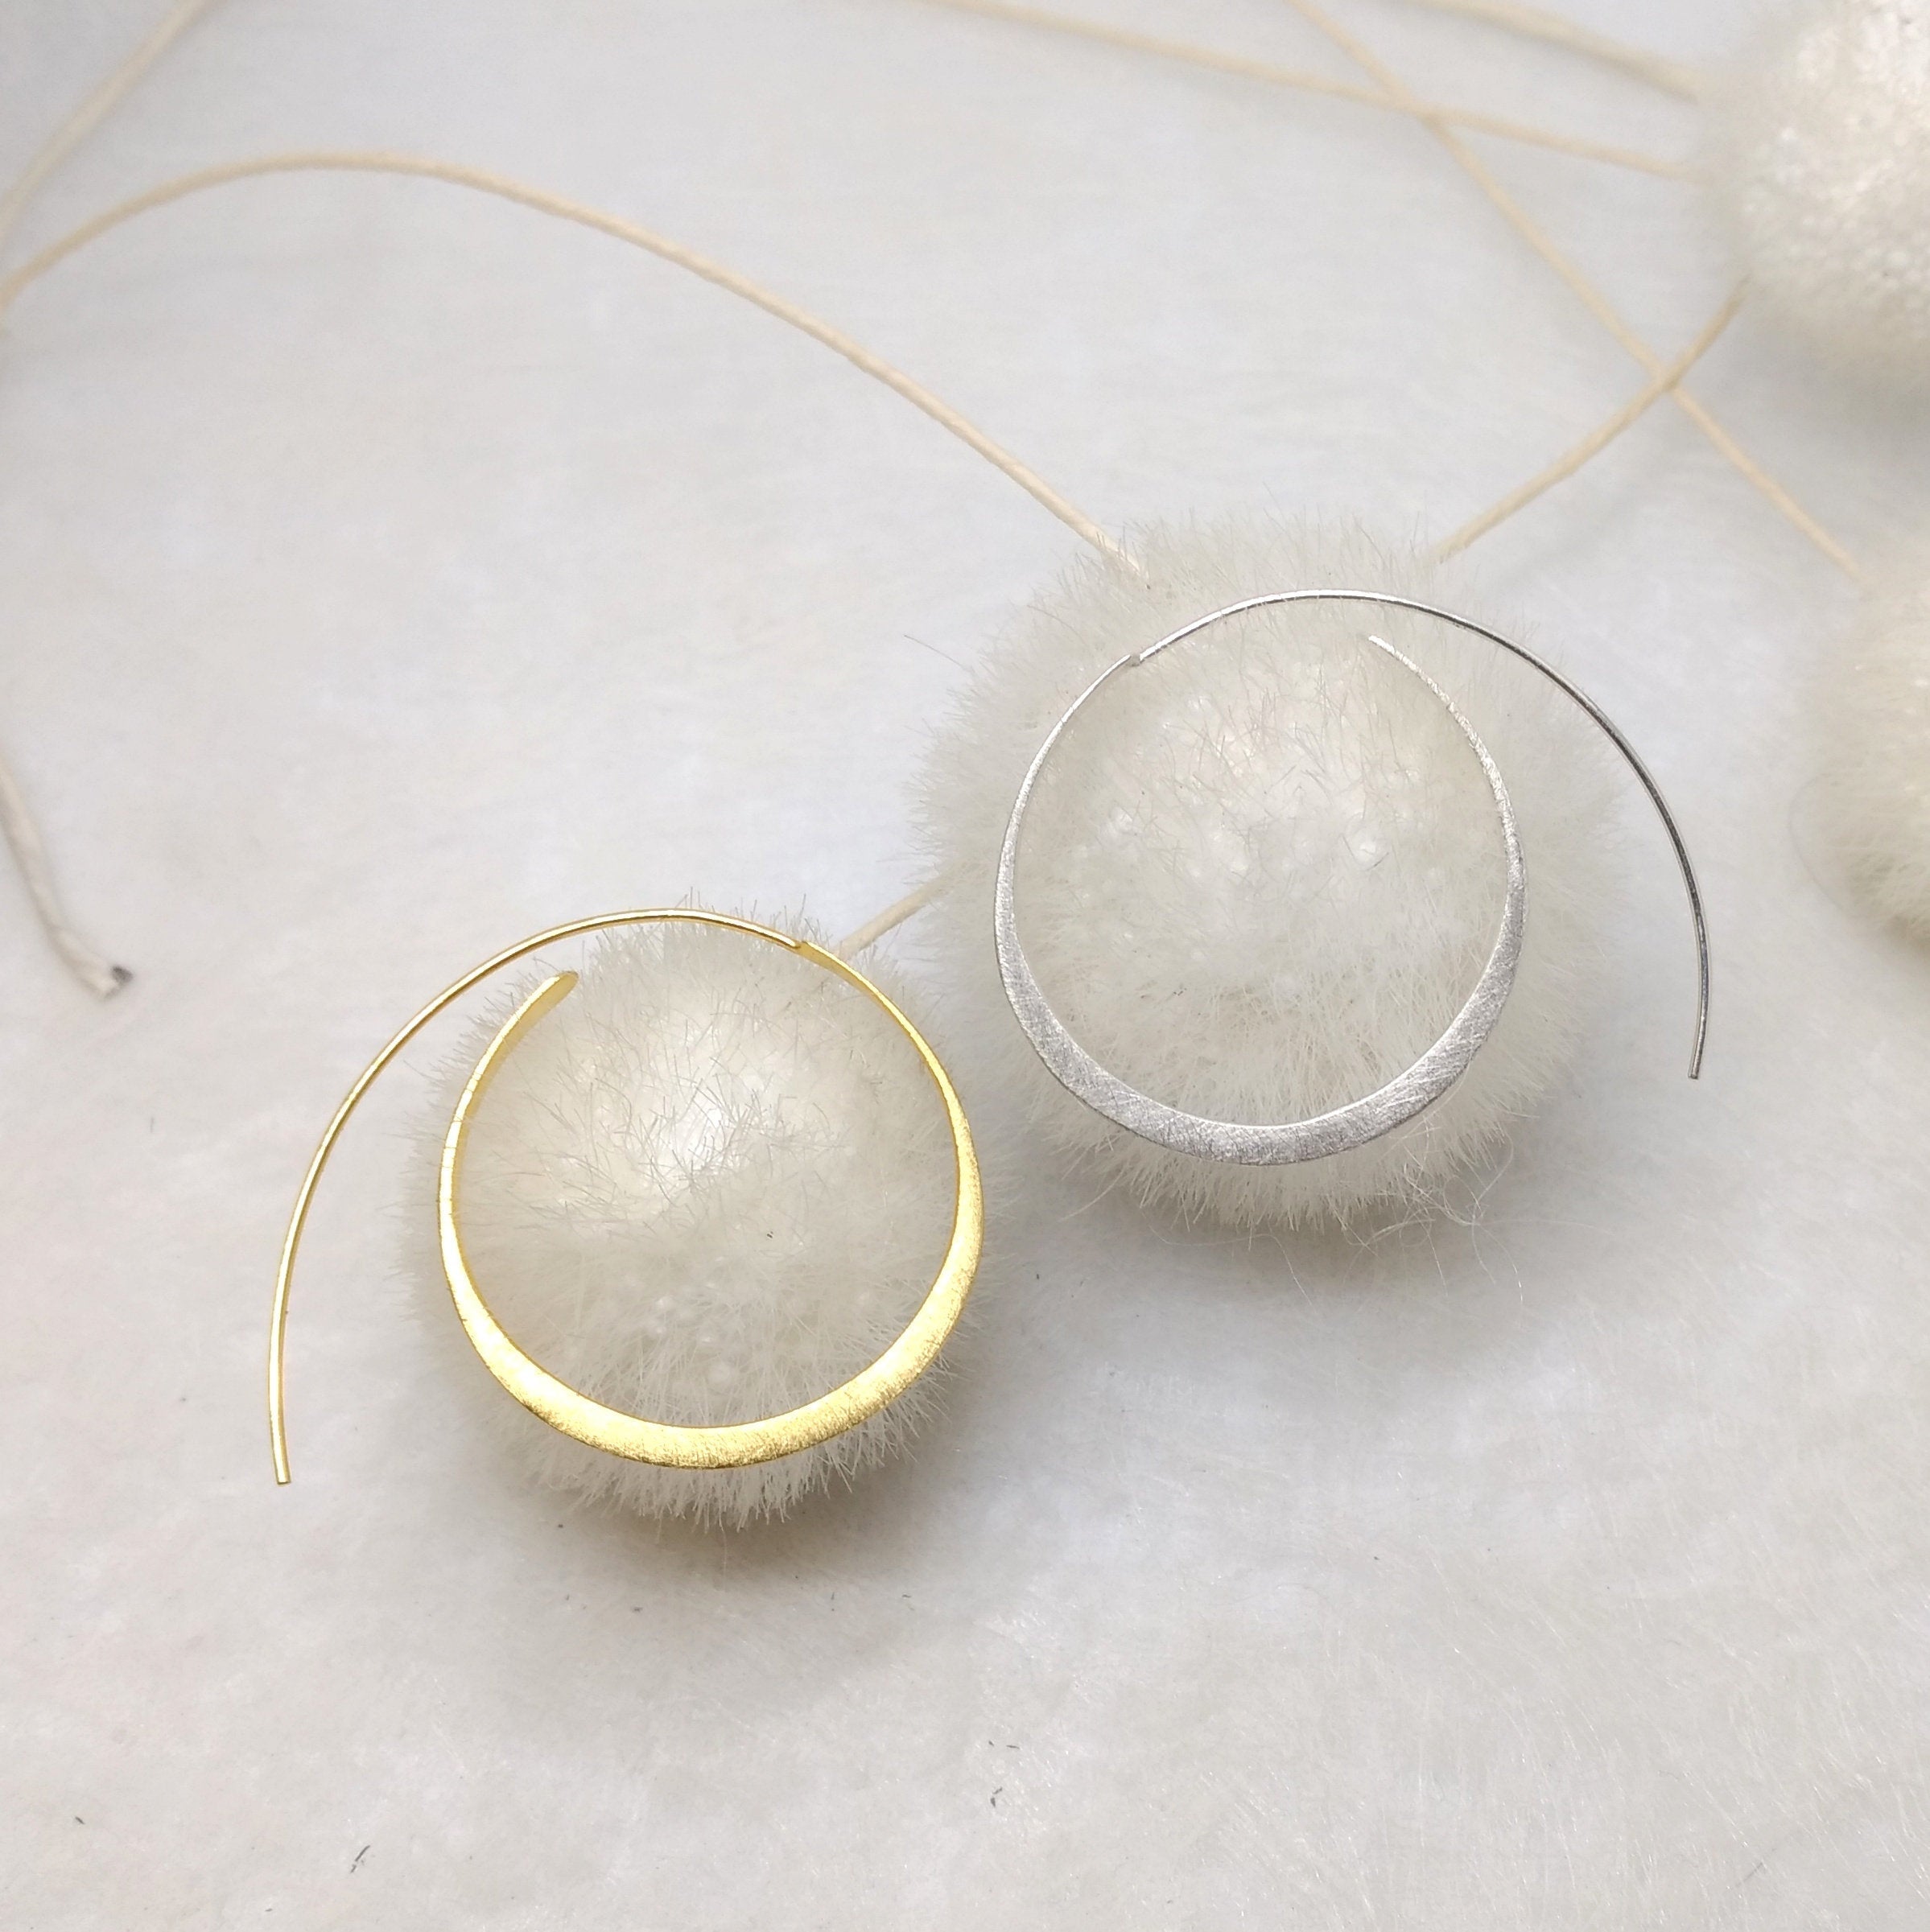 PaKti - hoops (ø 35mm) in silver or silver gold plated